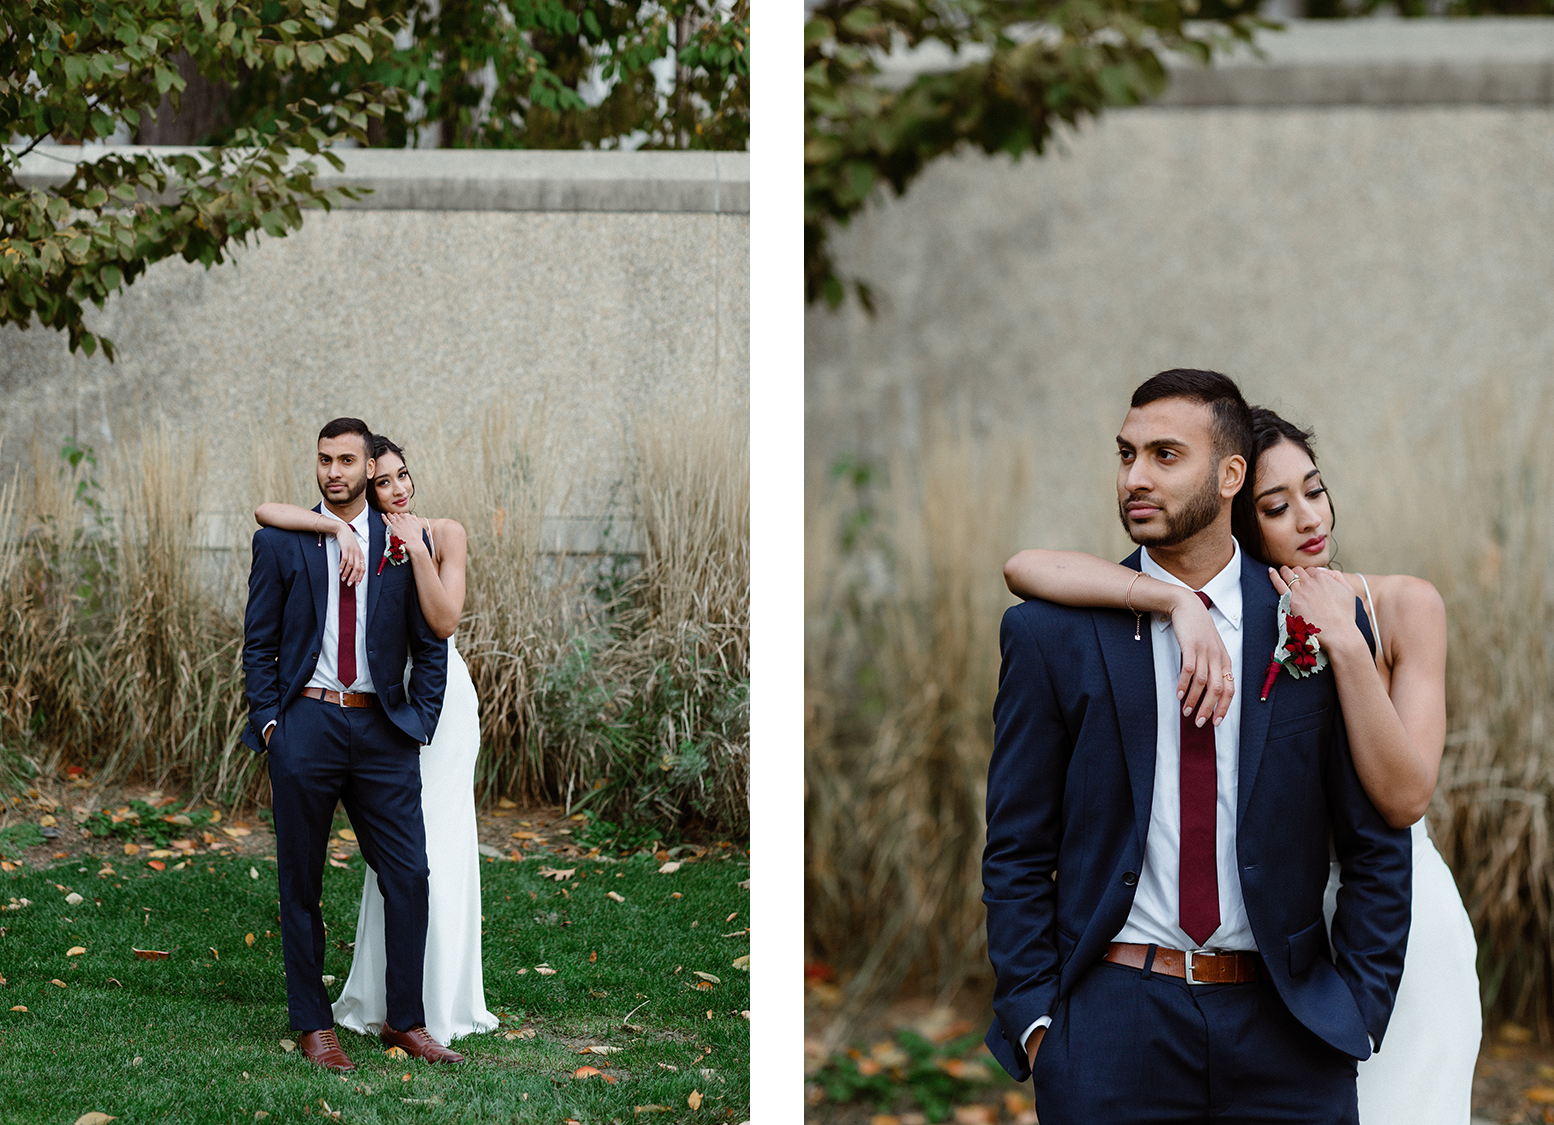 Small-Intimate-Elopement-Downtown-Toronto-U-of-T-Vows-where-to-elope-in-toronto-55.PNG